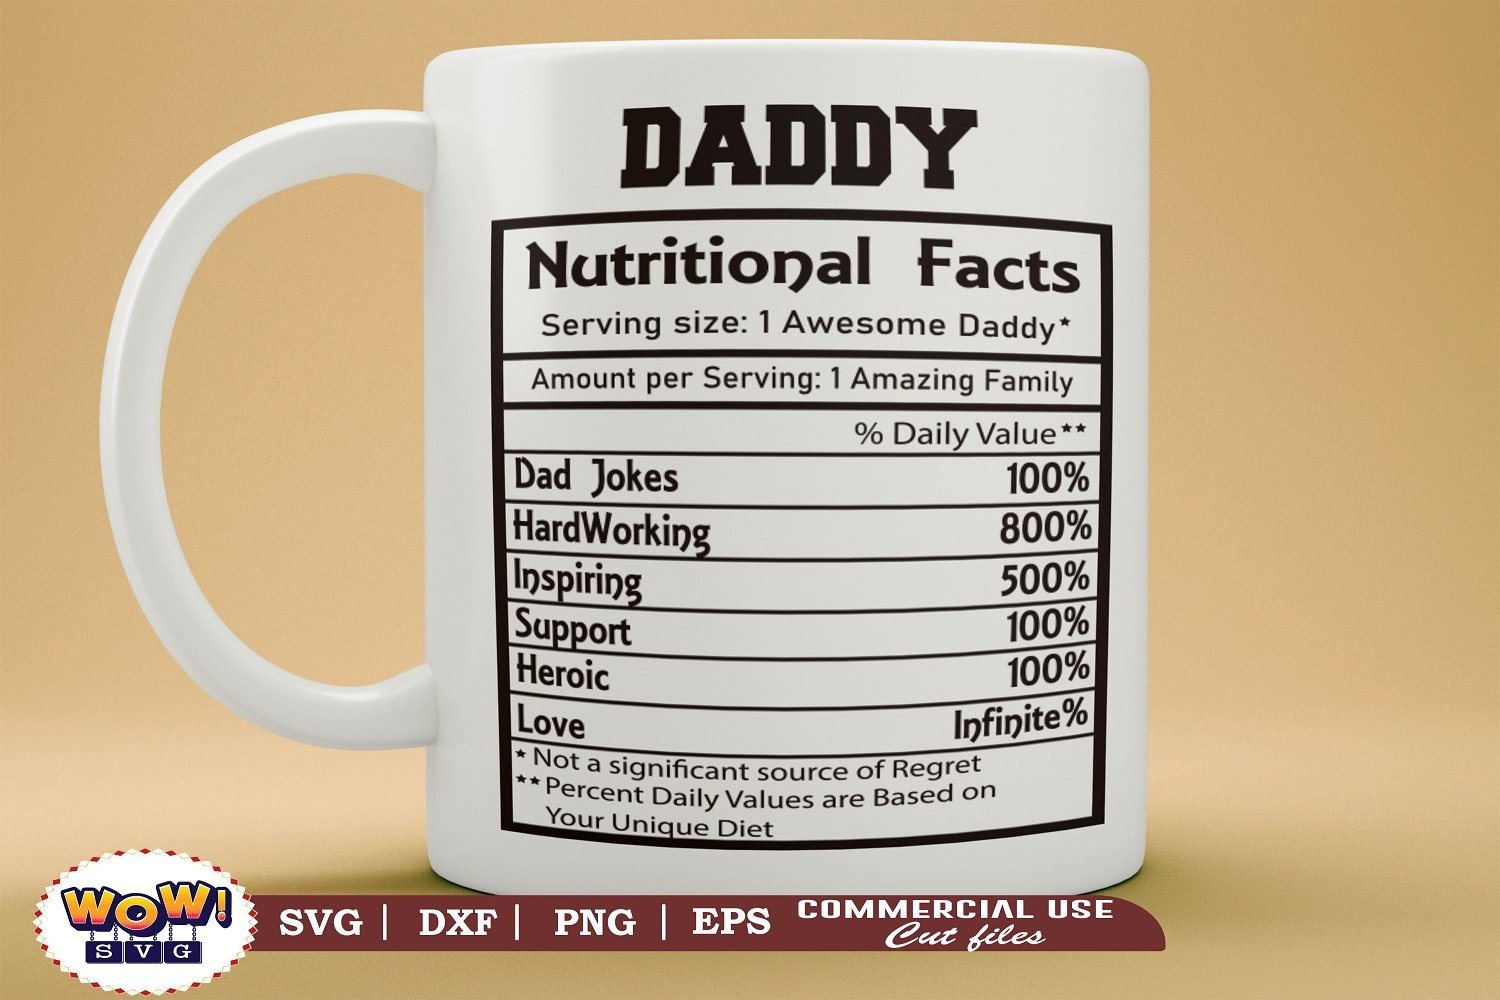 Download Daddy Nutrition Facts Svg Dad Nutritional Facts Svg Nutritional Facts Nutrition Chart Funny Quotes Svg So Fontsy